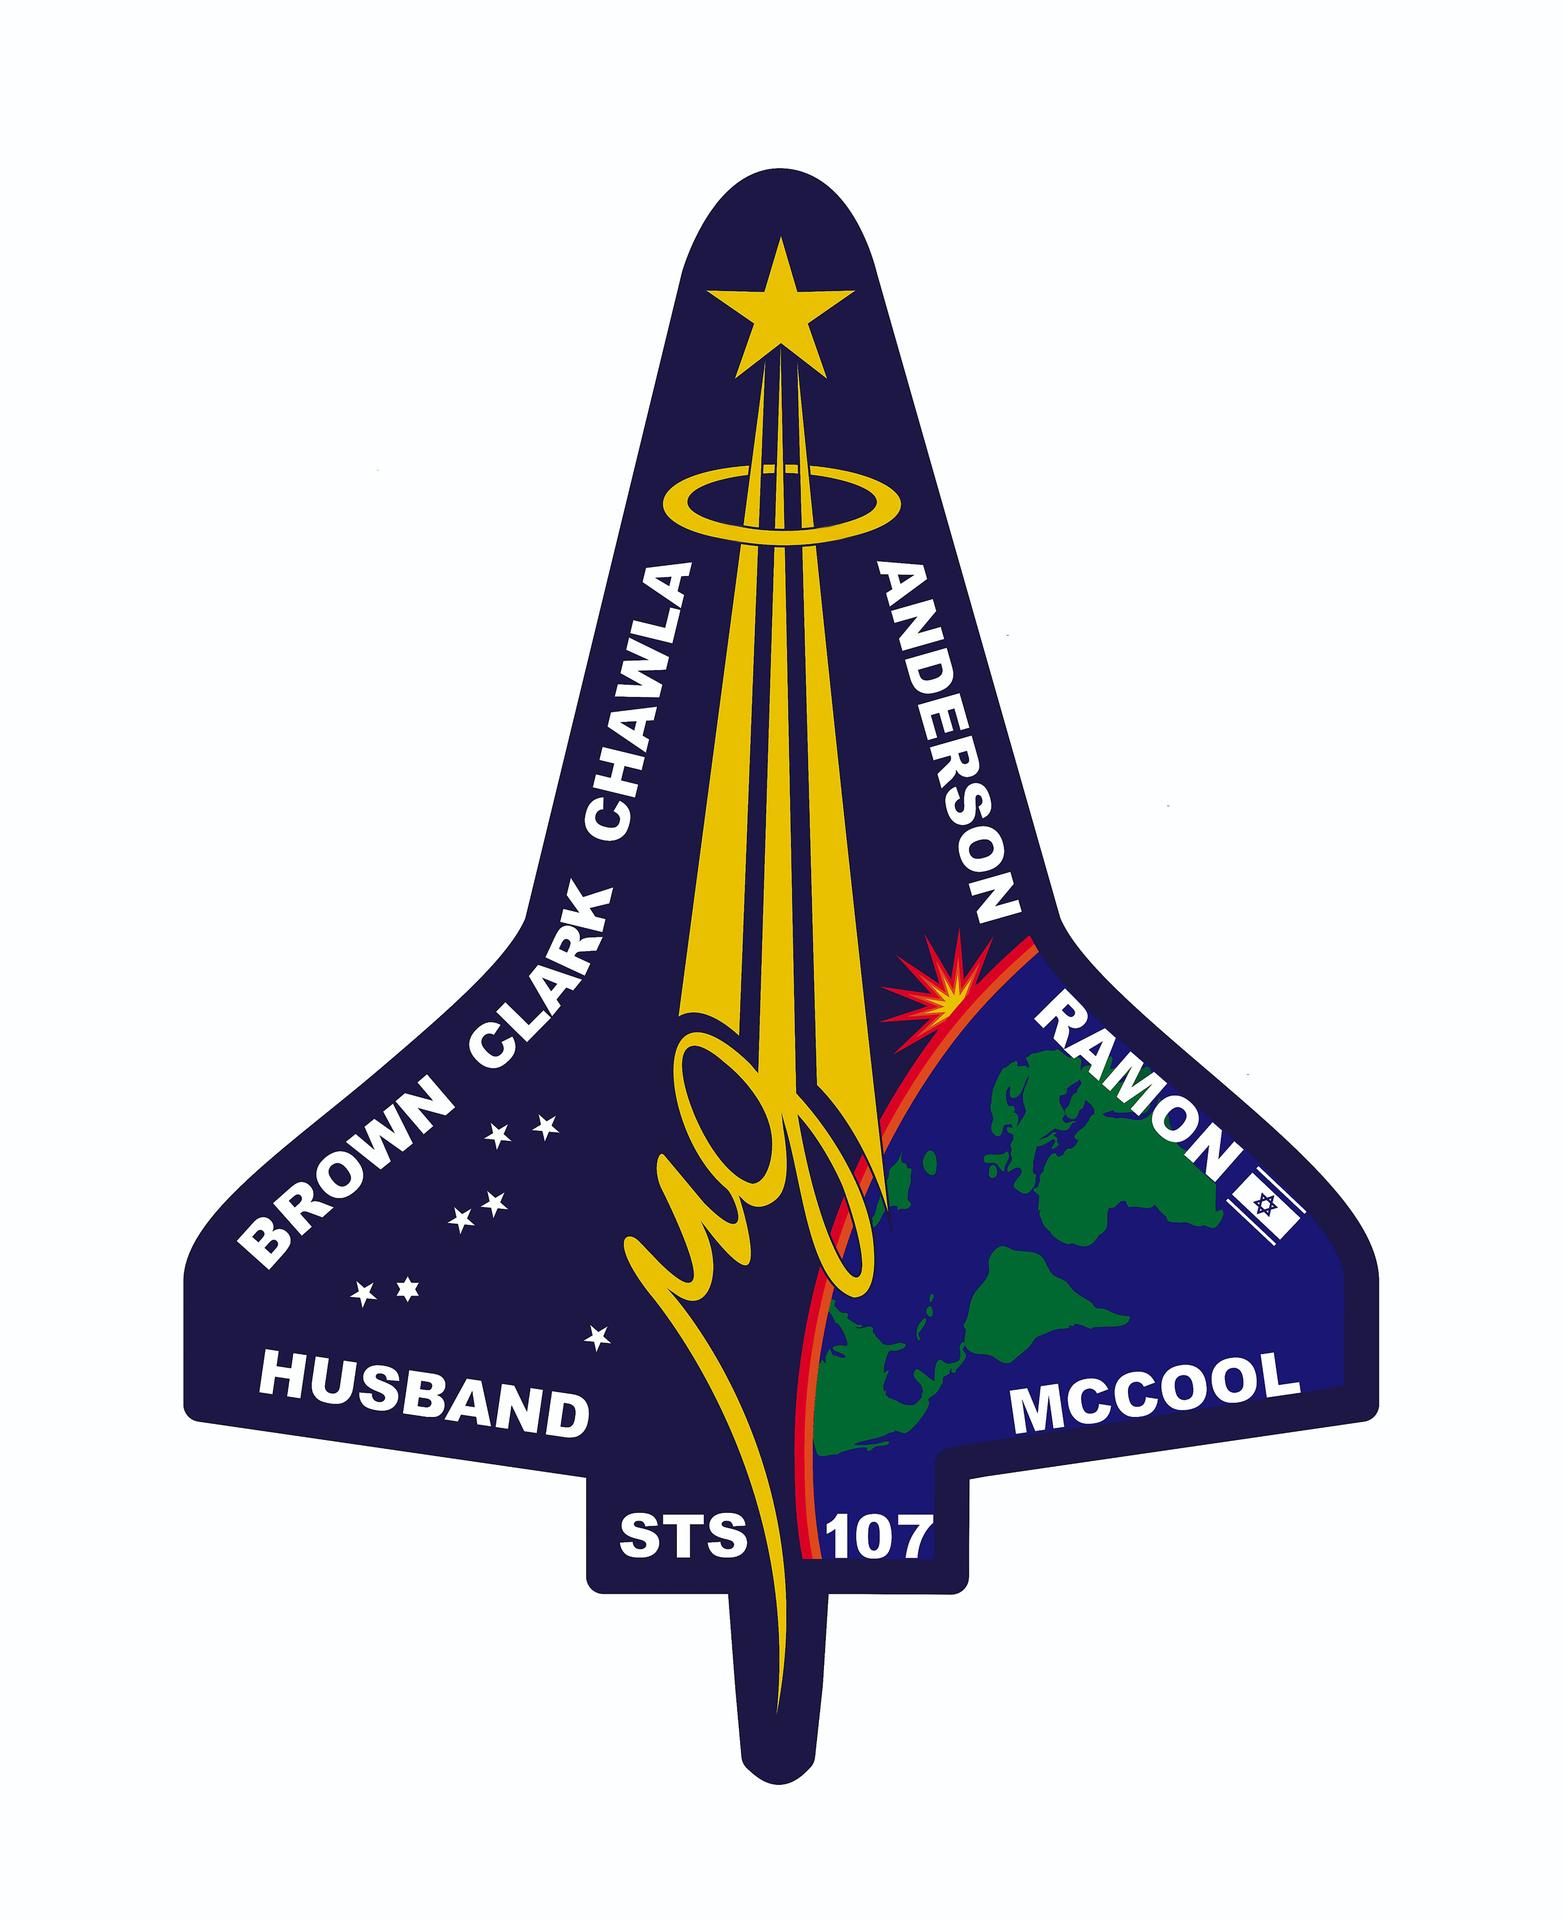 STS-107 mission insignia